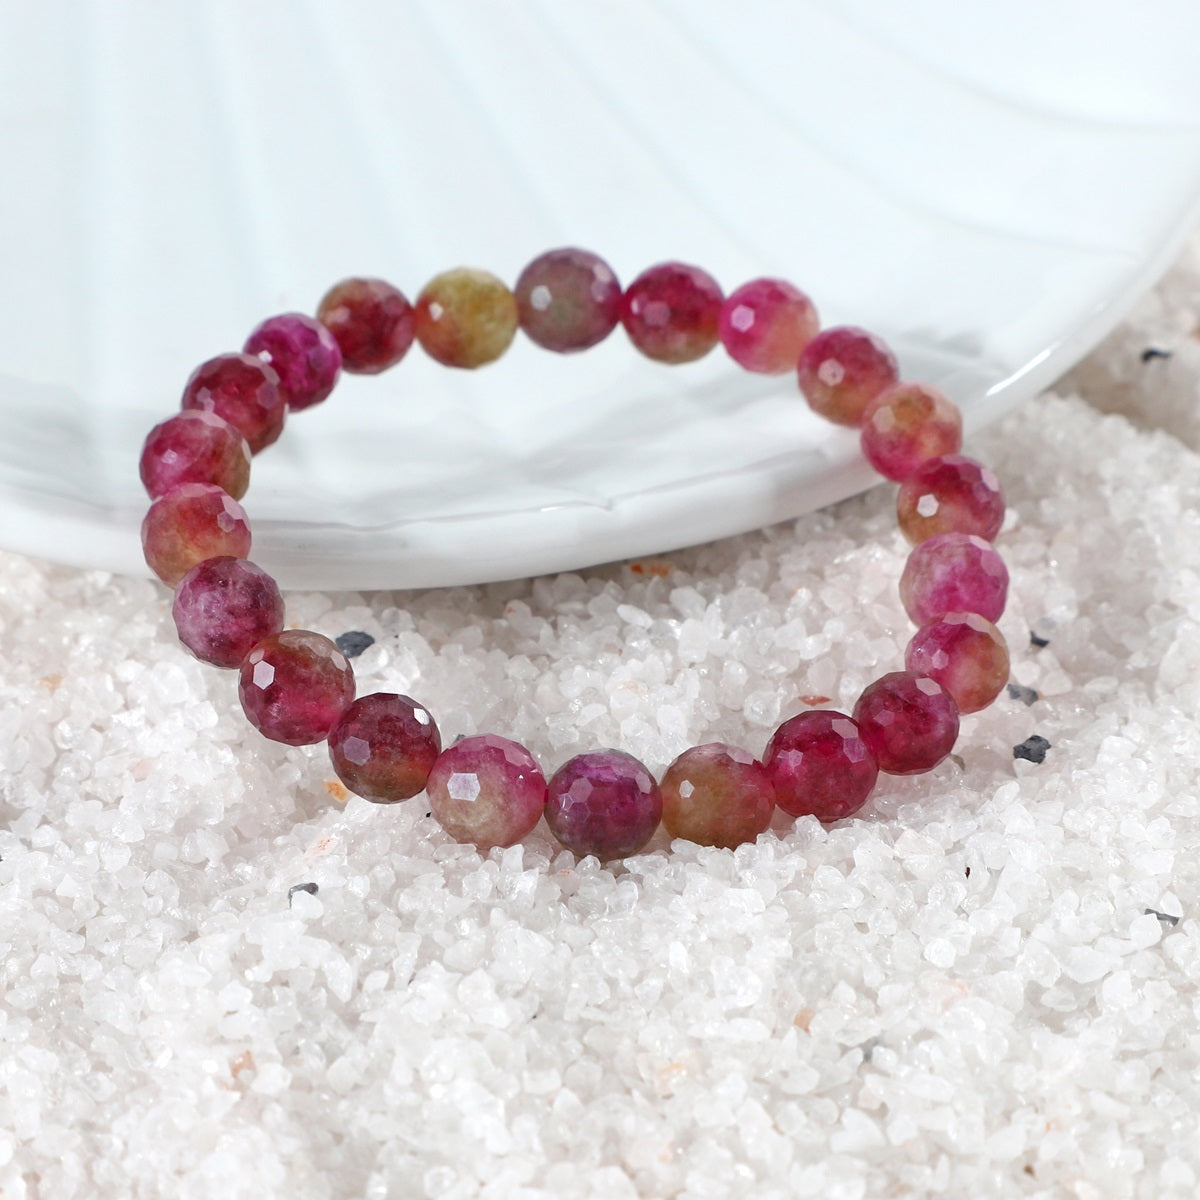 Faceted round Red Quartz stones in the bracelet, reflecting light and adding a touch of sophistication to your look